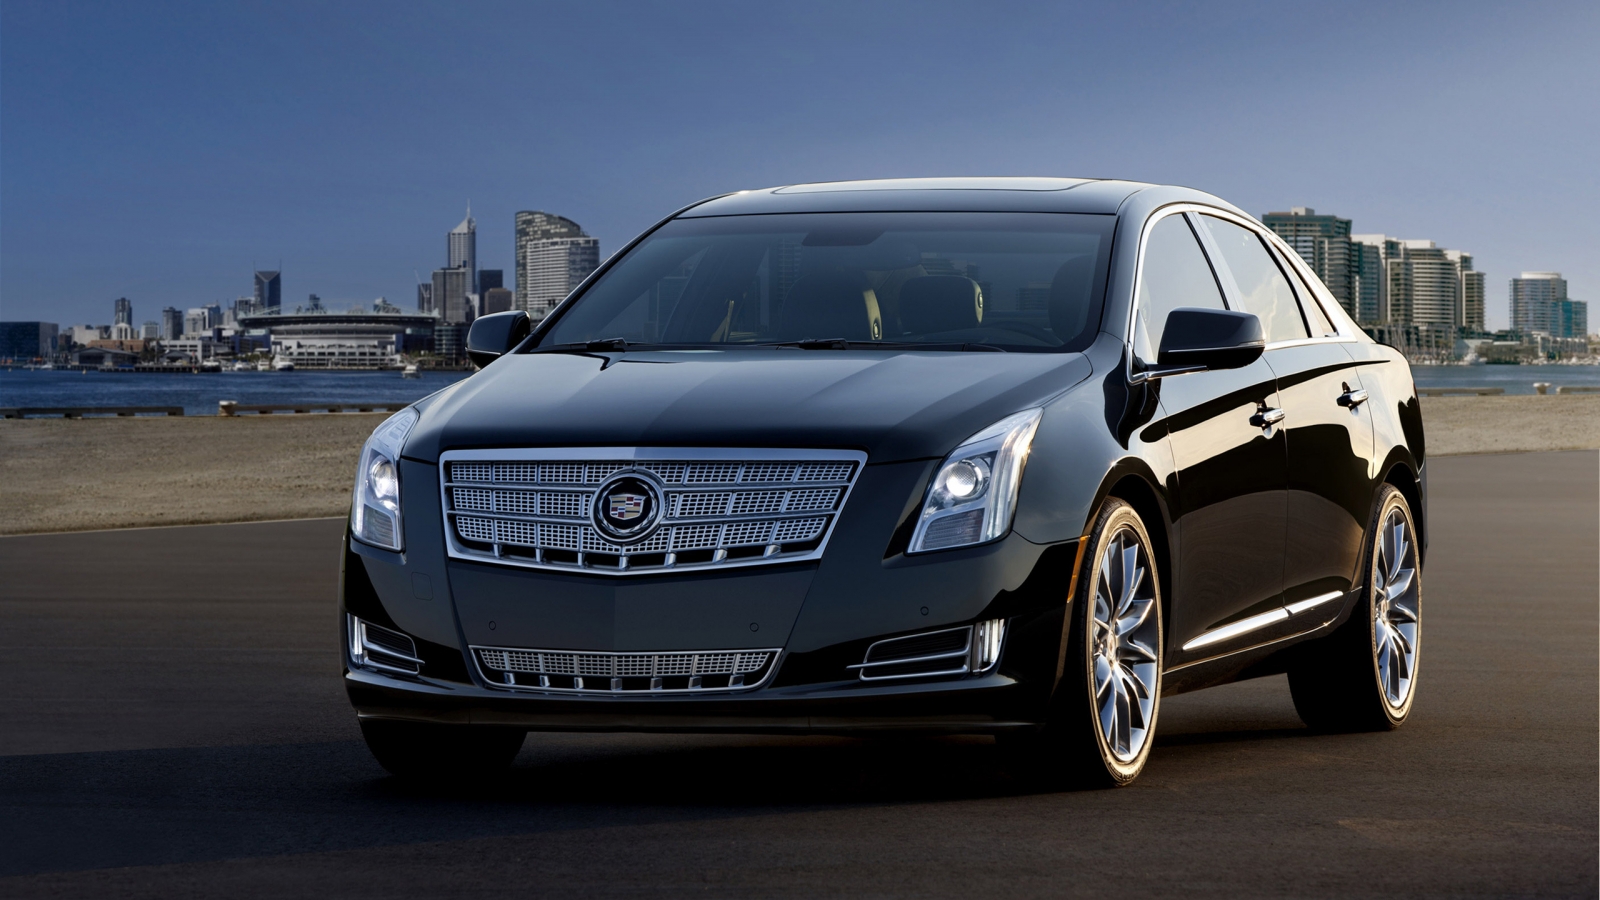 Cadillac XTS 2013 Edition for 1600 x 900 HDTV resolution